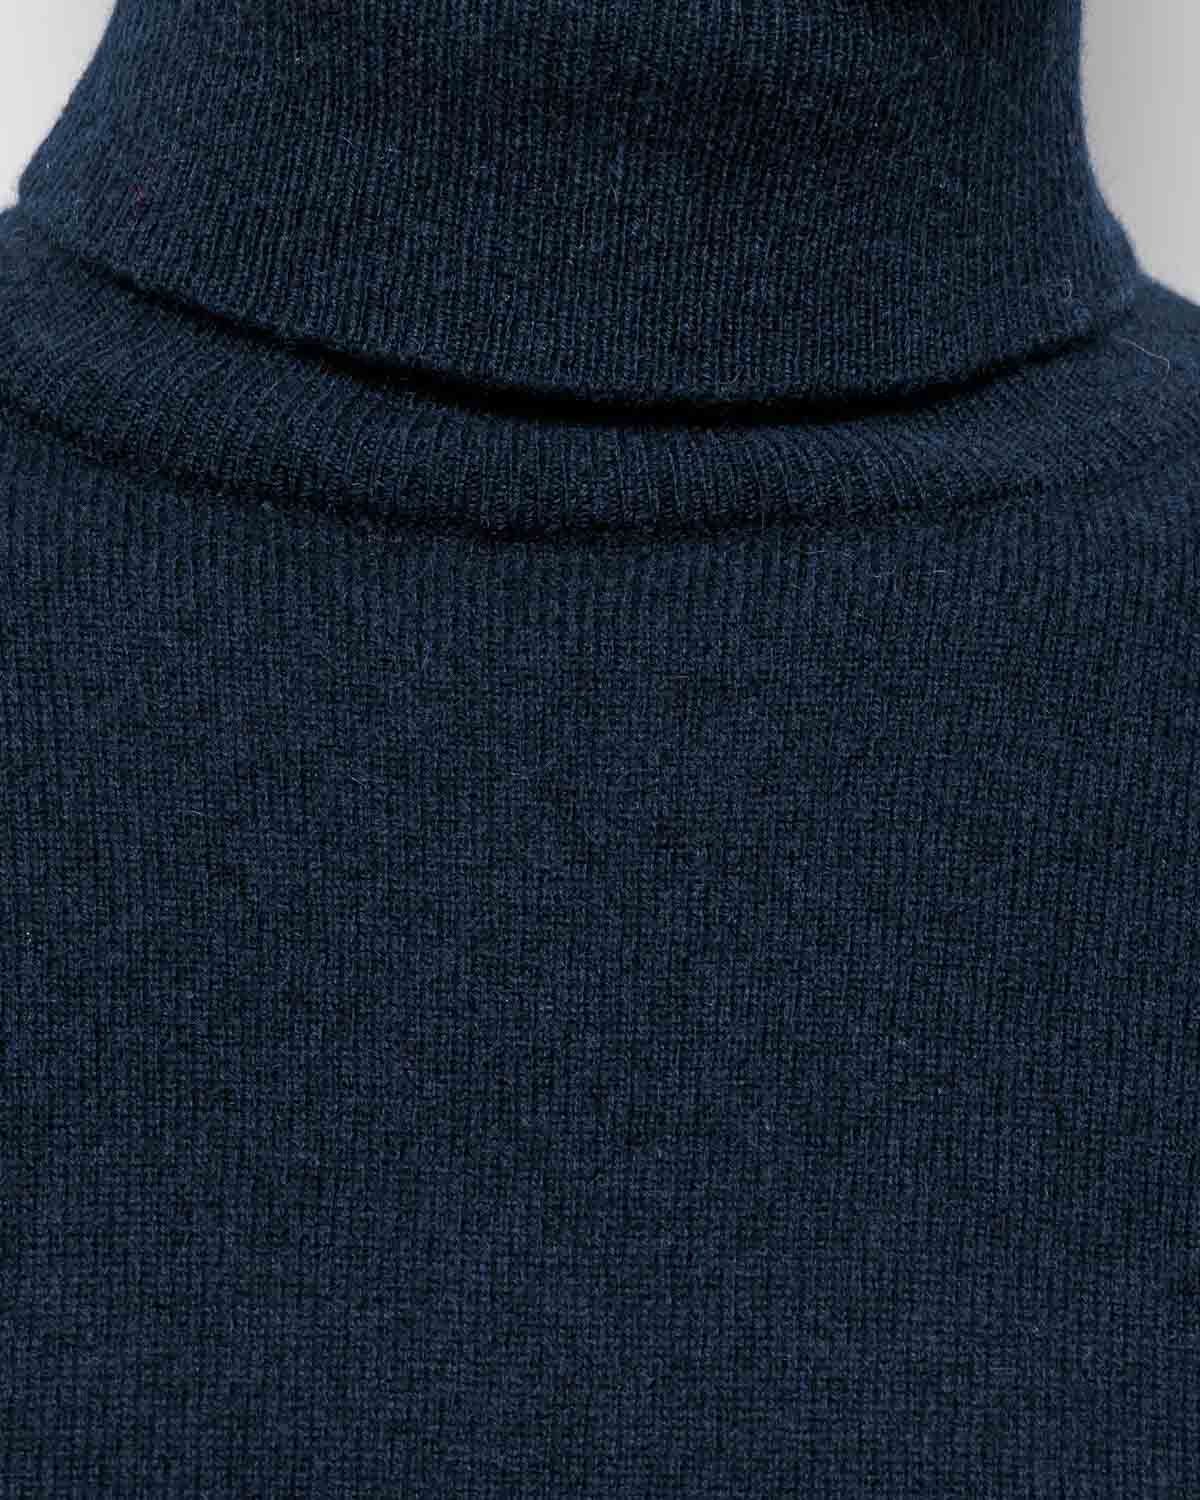 Absolut Cashmere Clara Rollneck in Nuit